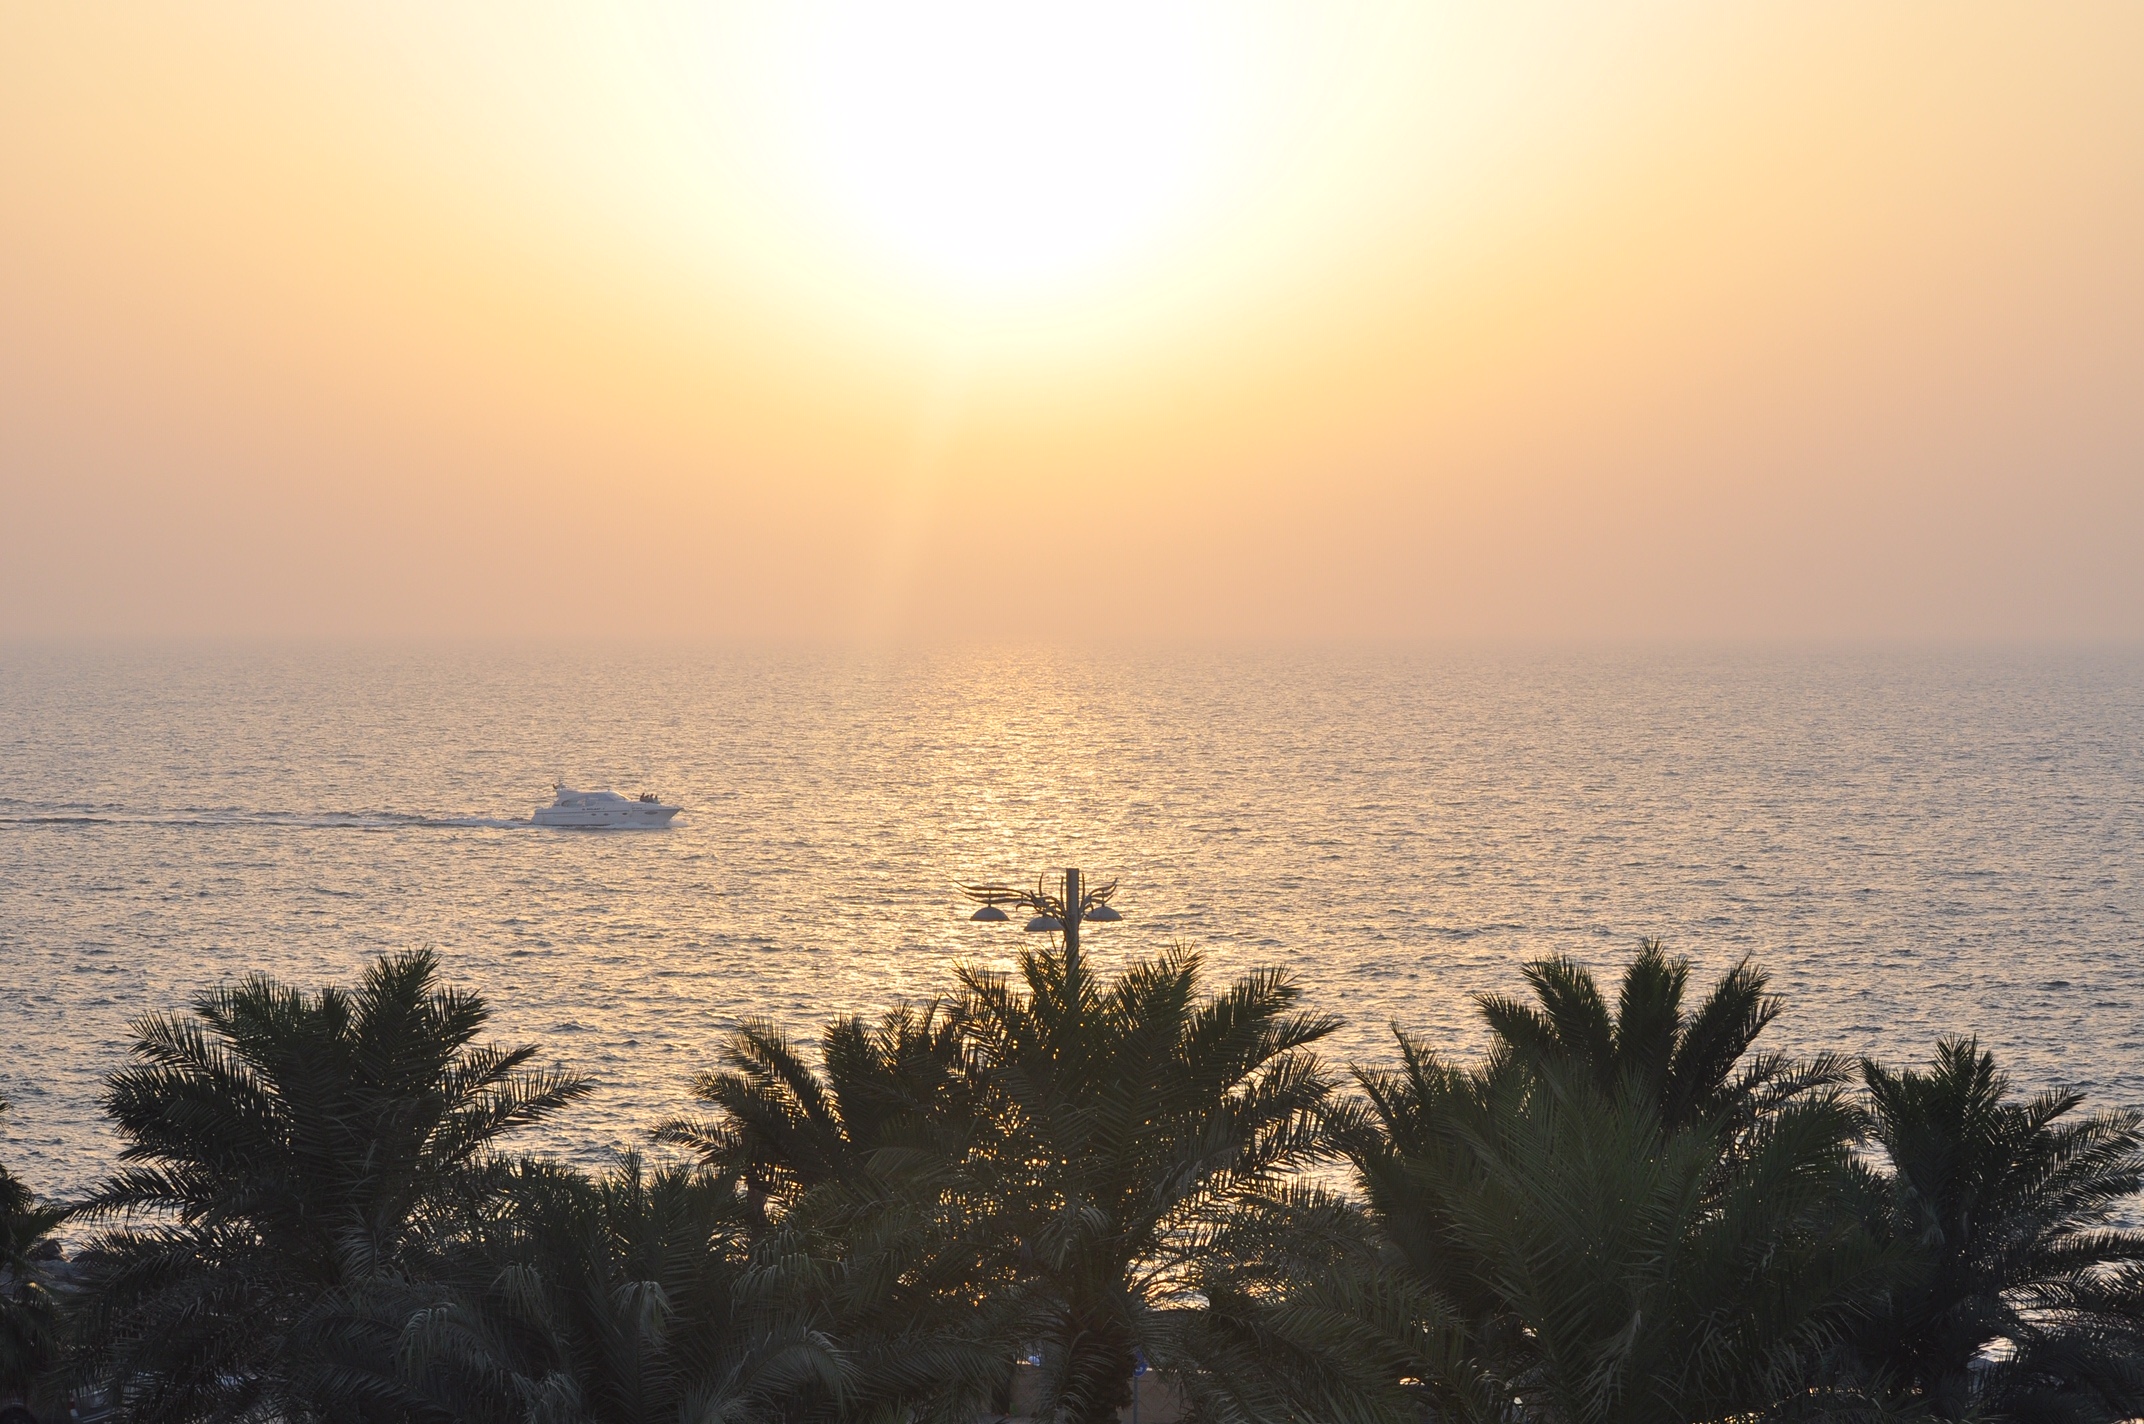 What a beautiful scenery this sunset in Palm Jumeirah, Dubai